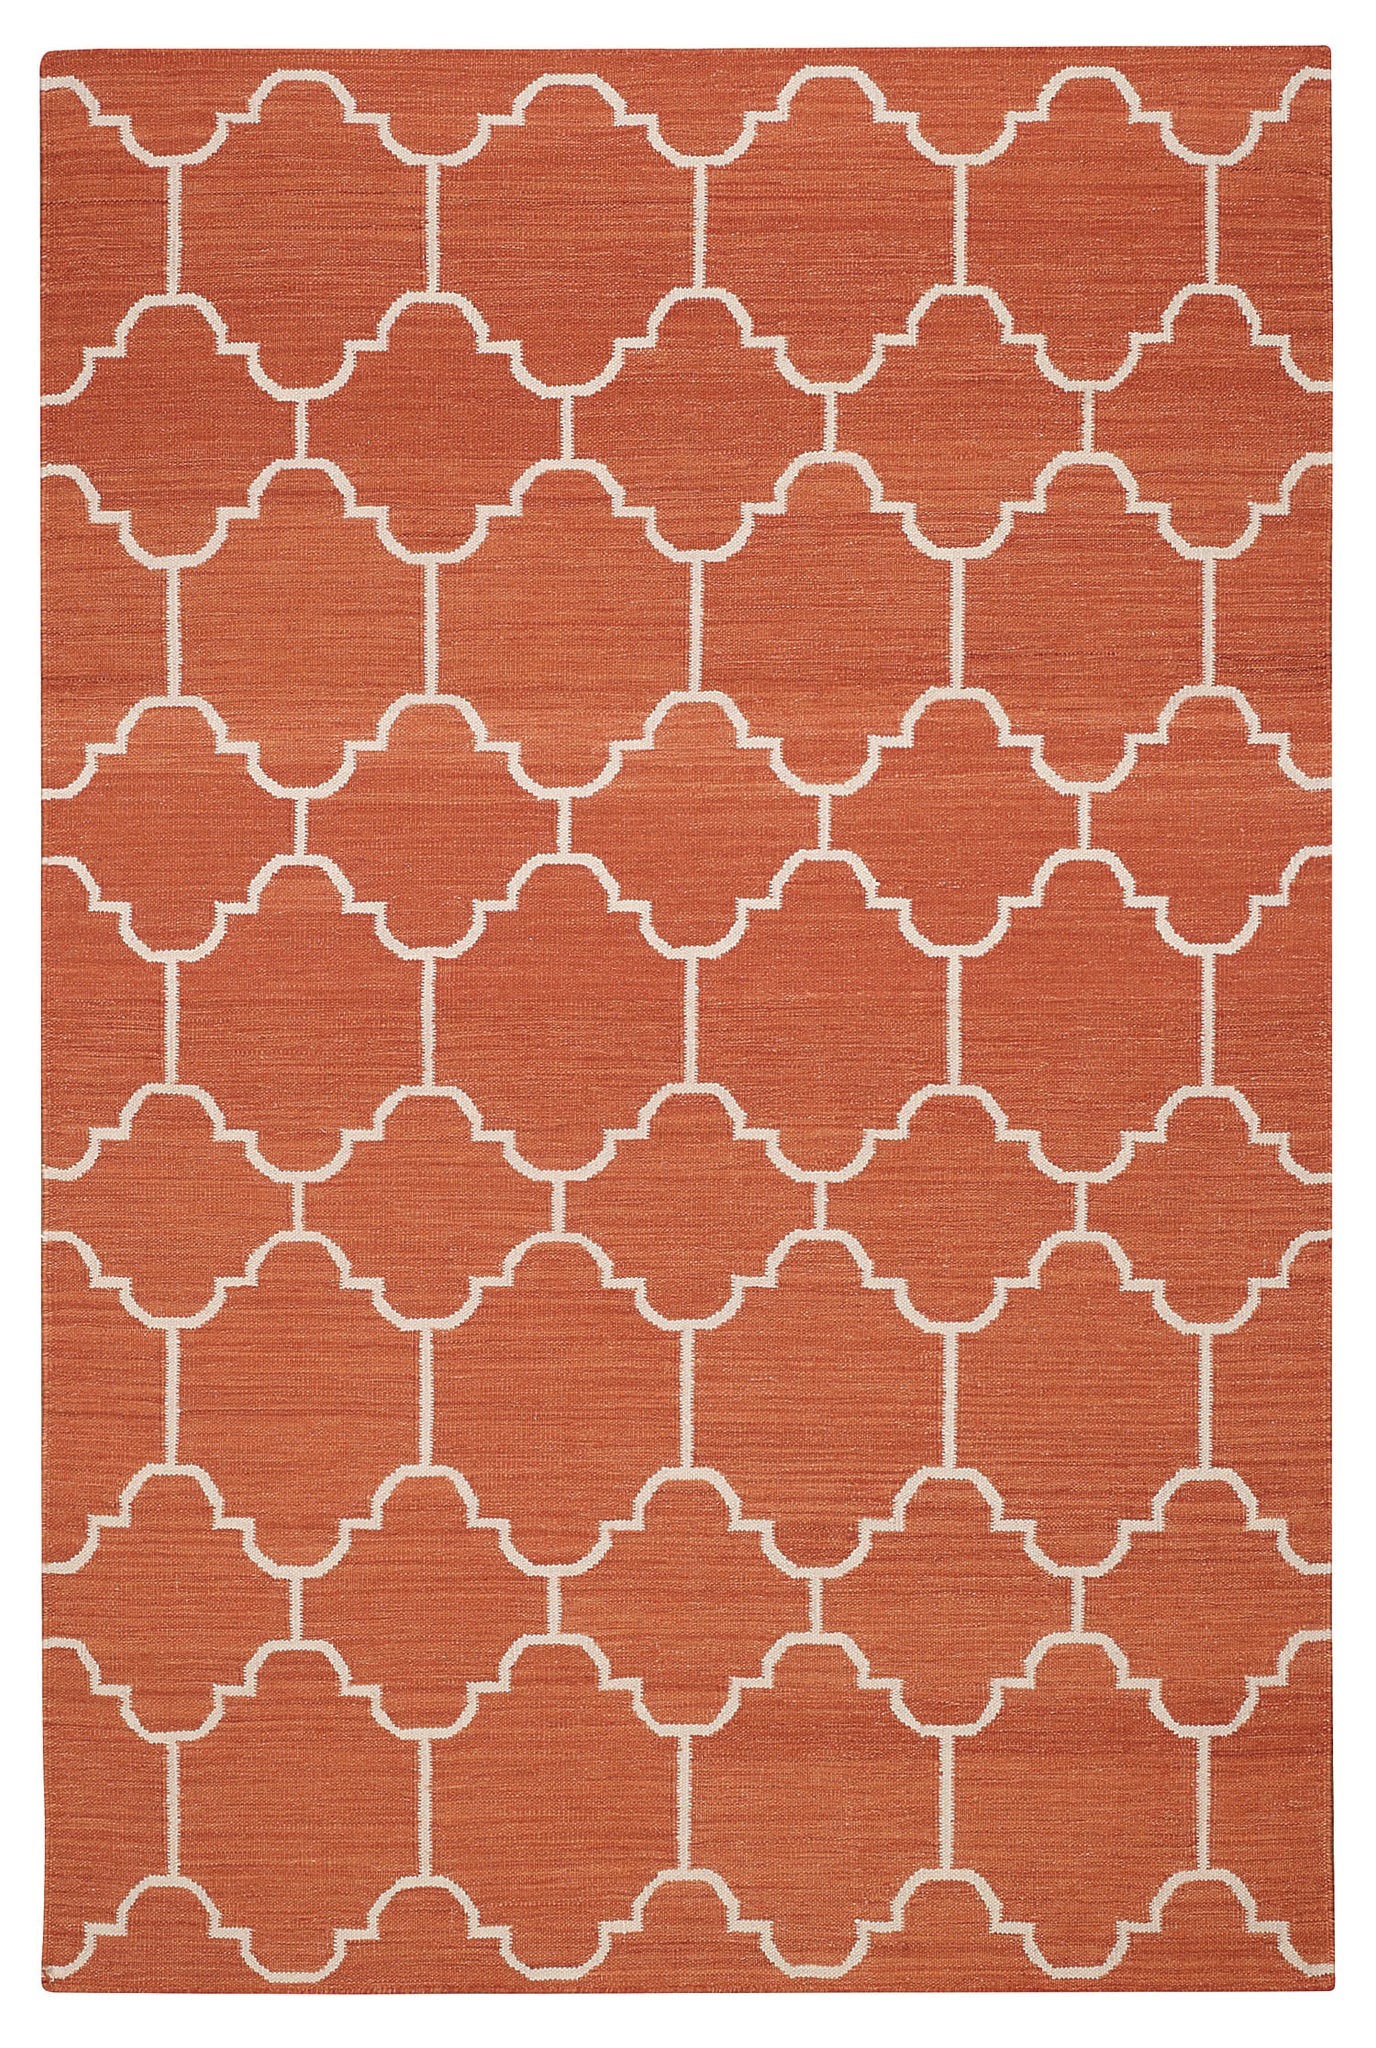 Capel Serpentine 3623 Sunny 800 Area Rug by Genevieve Gorder main image